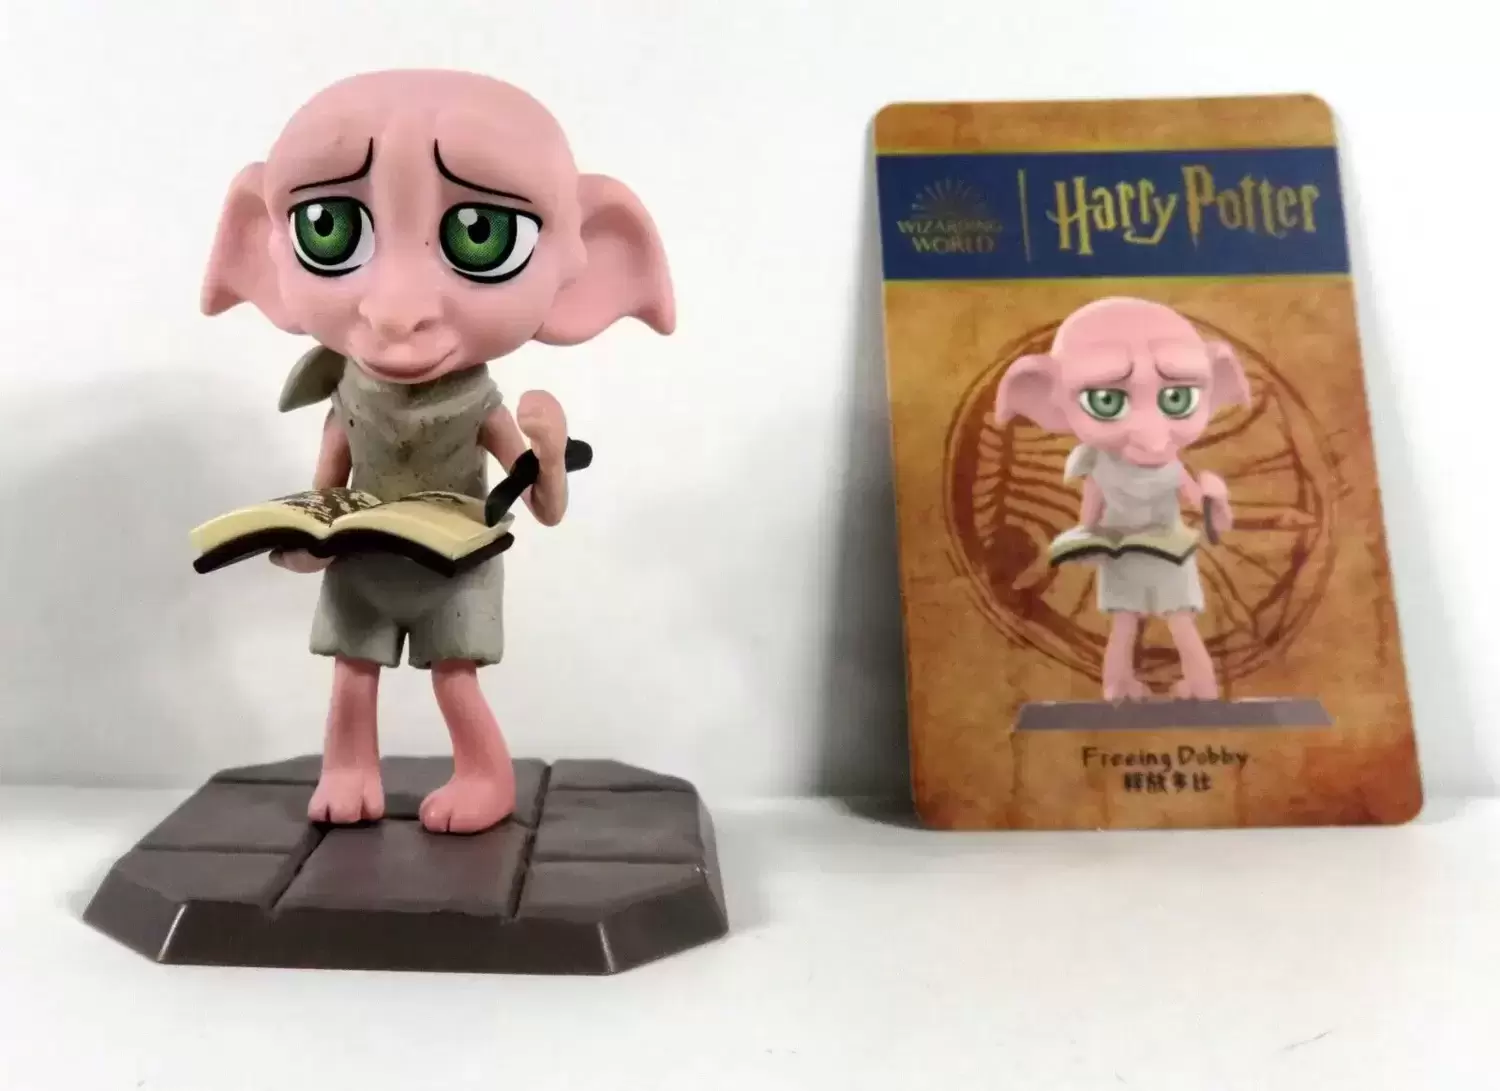 Harry Potter And The Chamber of Secrets - Freeing Dobby